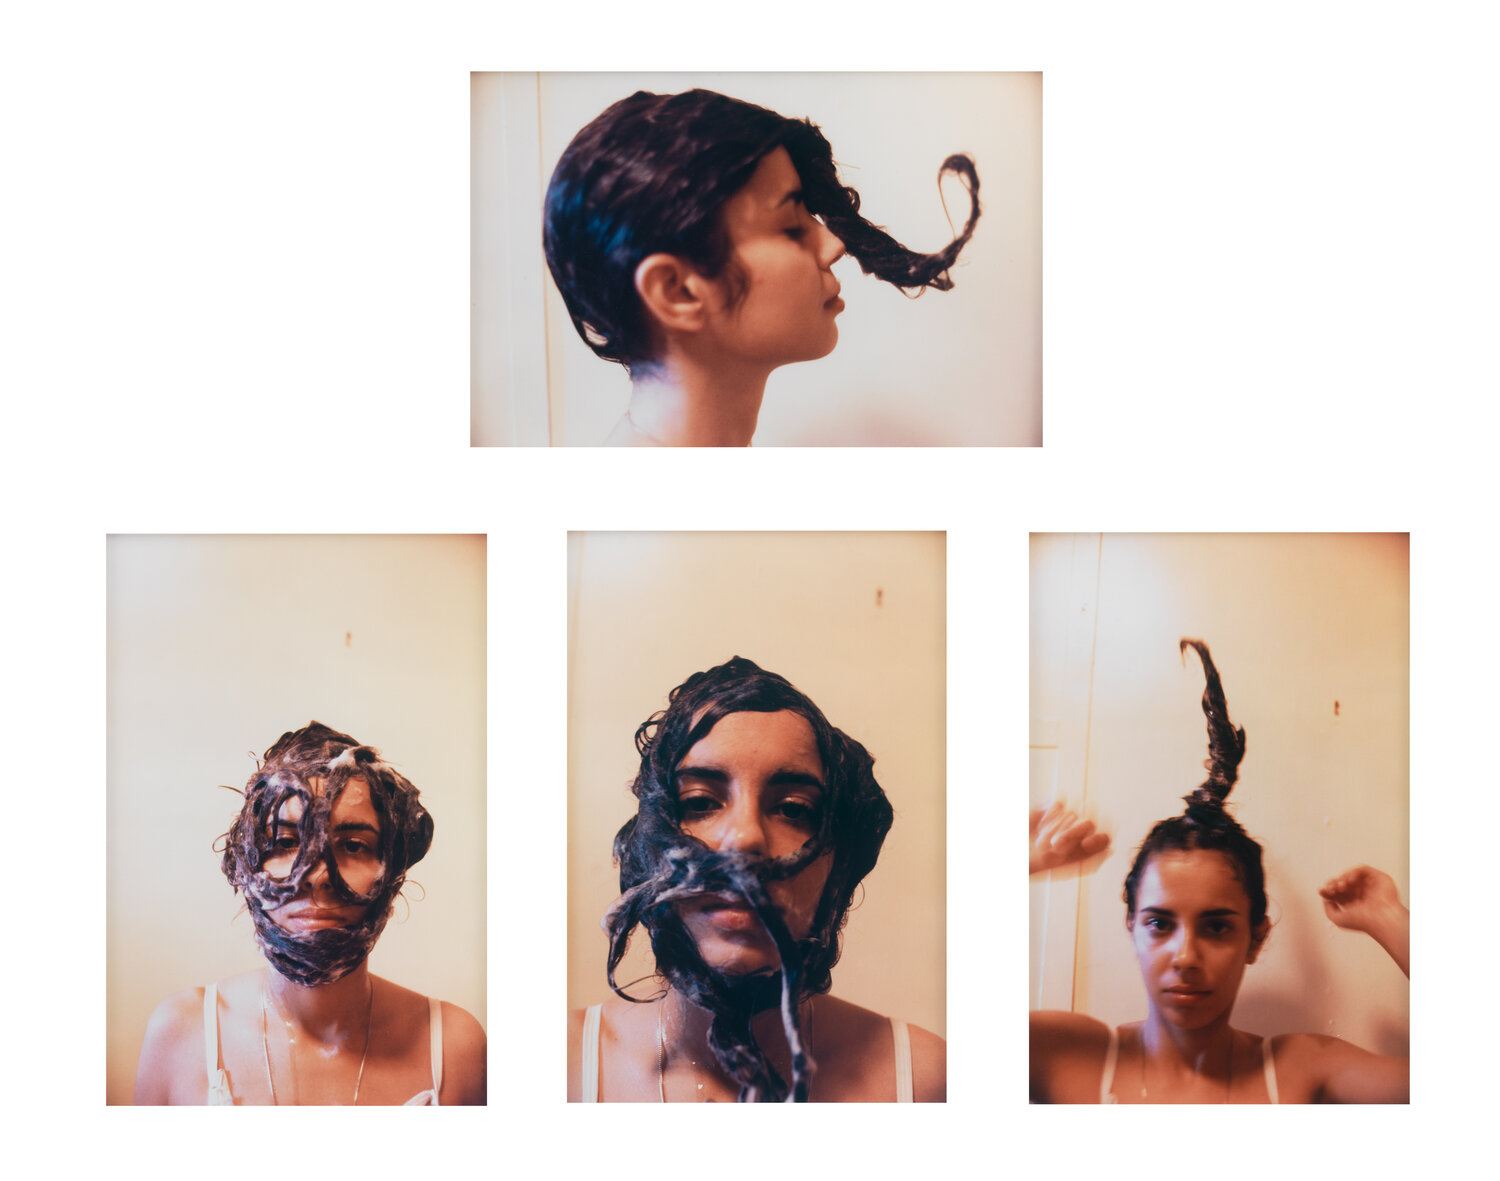 Ana Mendieta’s 1972 photographic work, “Untitled (Cosmetic Facial Variations)”